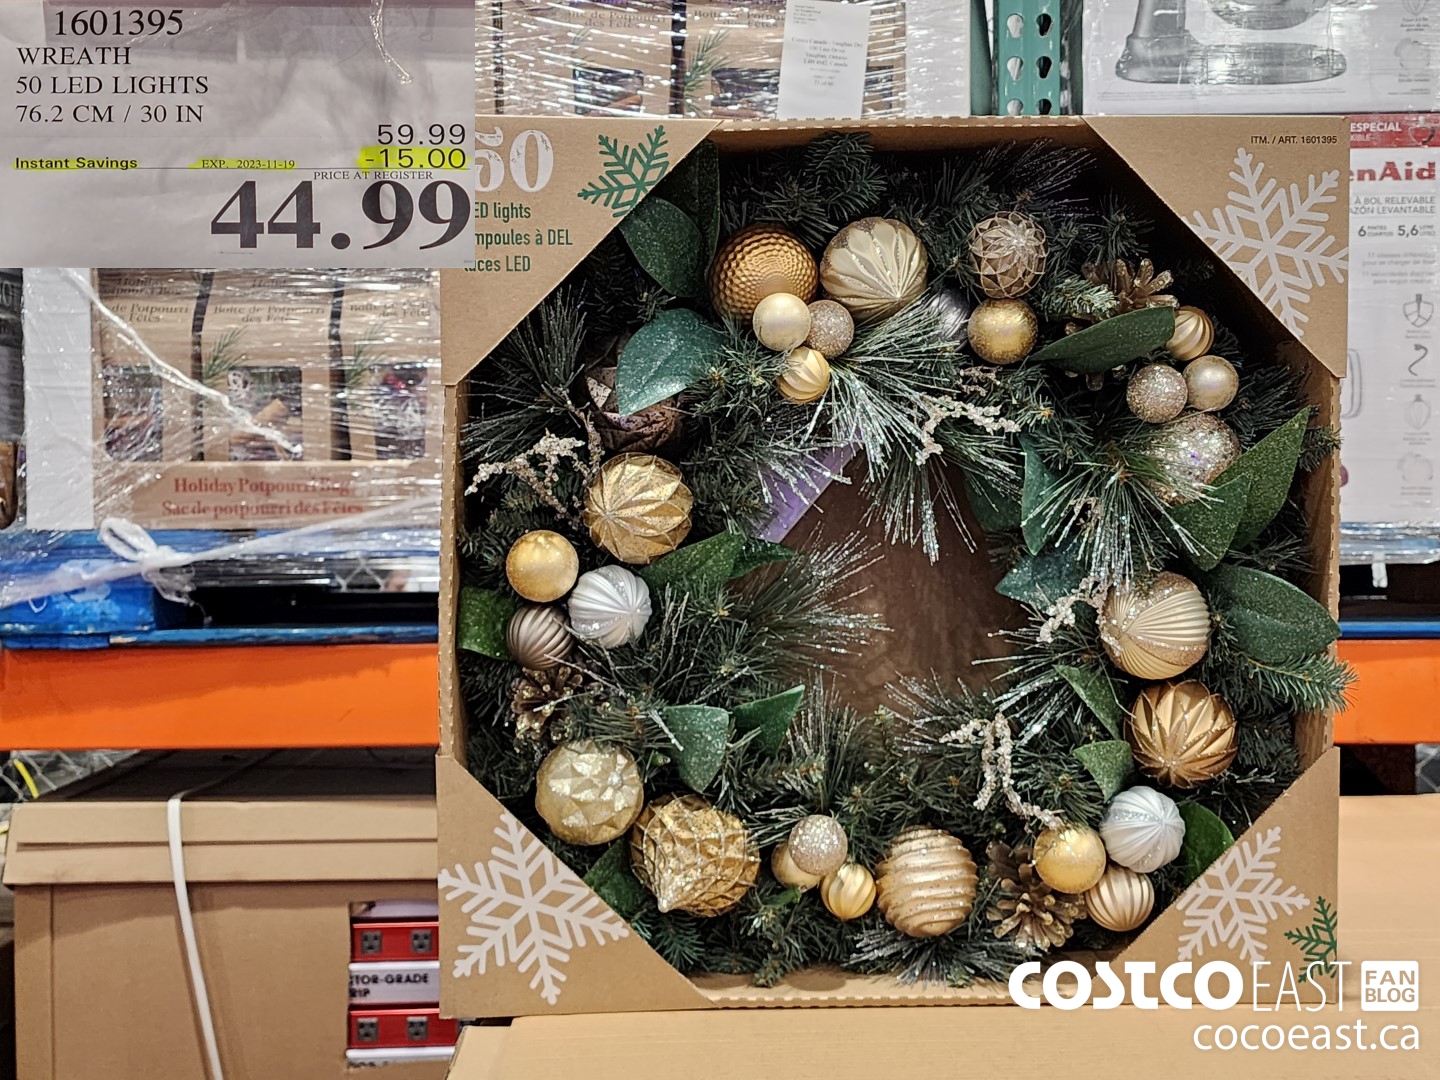 1601395 WREATH 50 LED LIGHTS 76.2 CM / 30 IN ($15.00 INSTANT SAVINGS EXPIRES ON 2023-11-19) $44.99